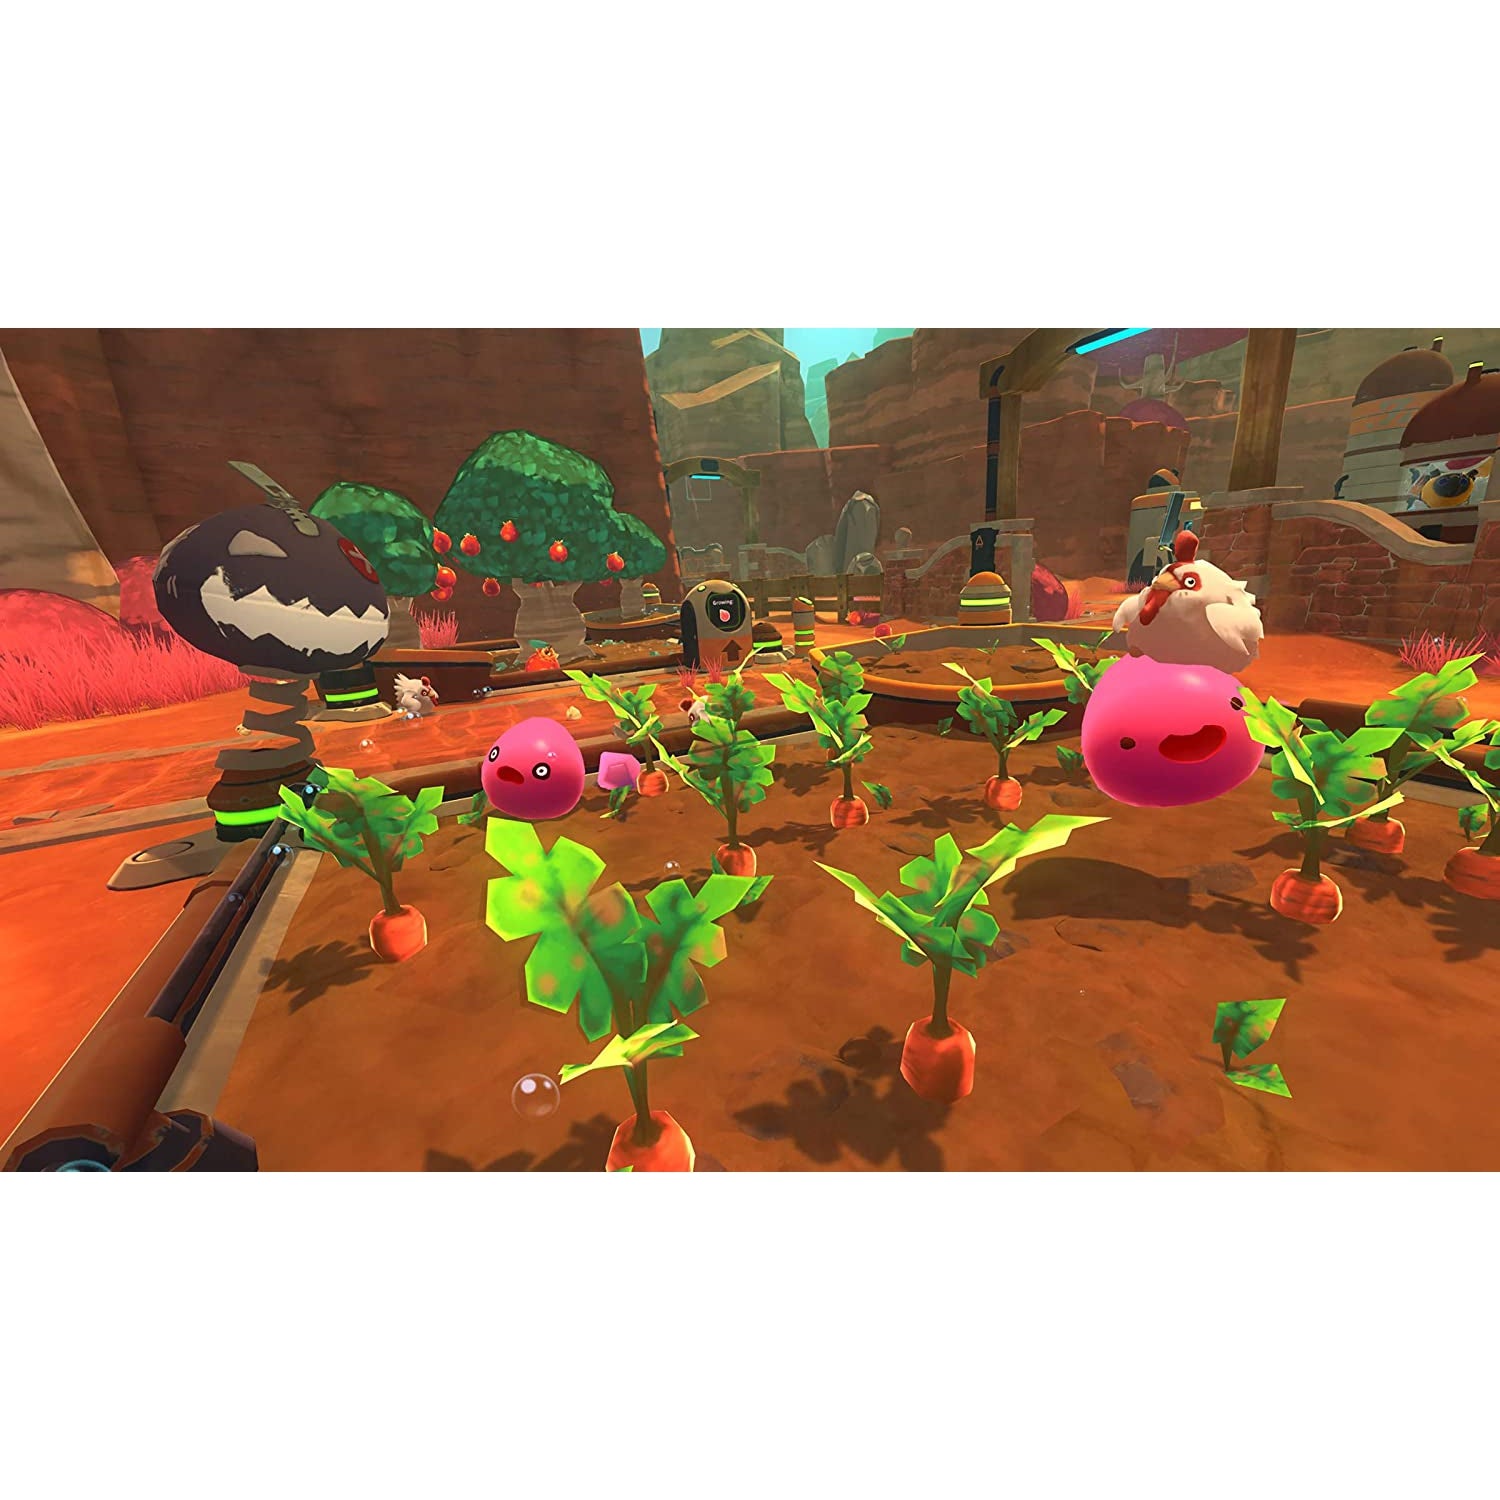 Slime Rancher Deluxe Edition (Xbox One)